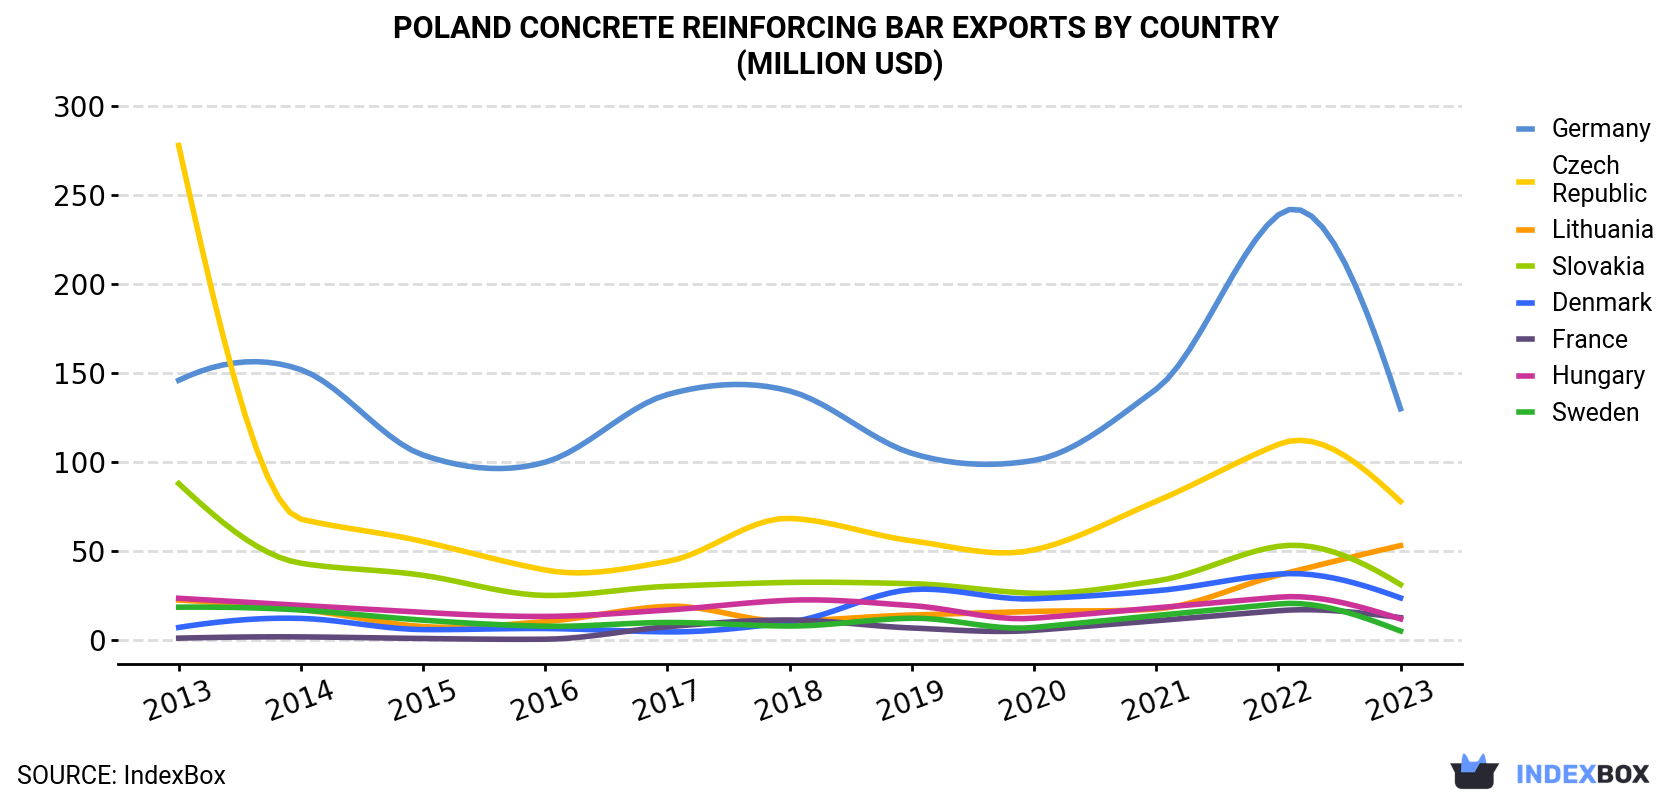 Poland Concrete Reinforcing Bar Exports By Country (Million USD)